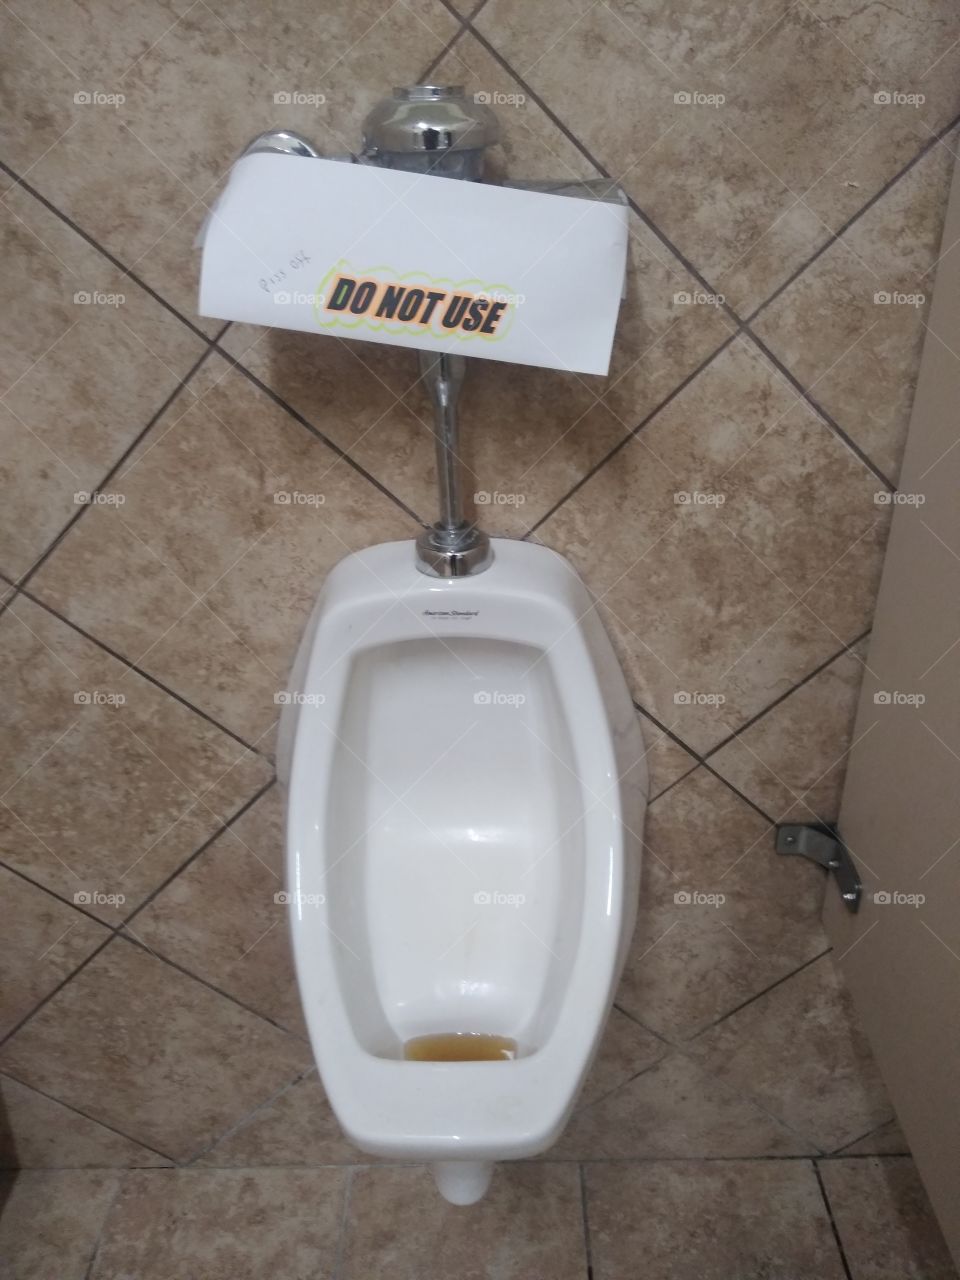 Filthy Urinal